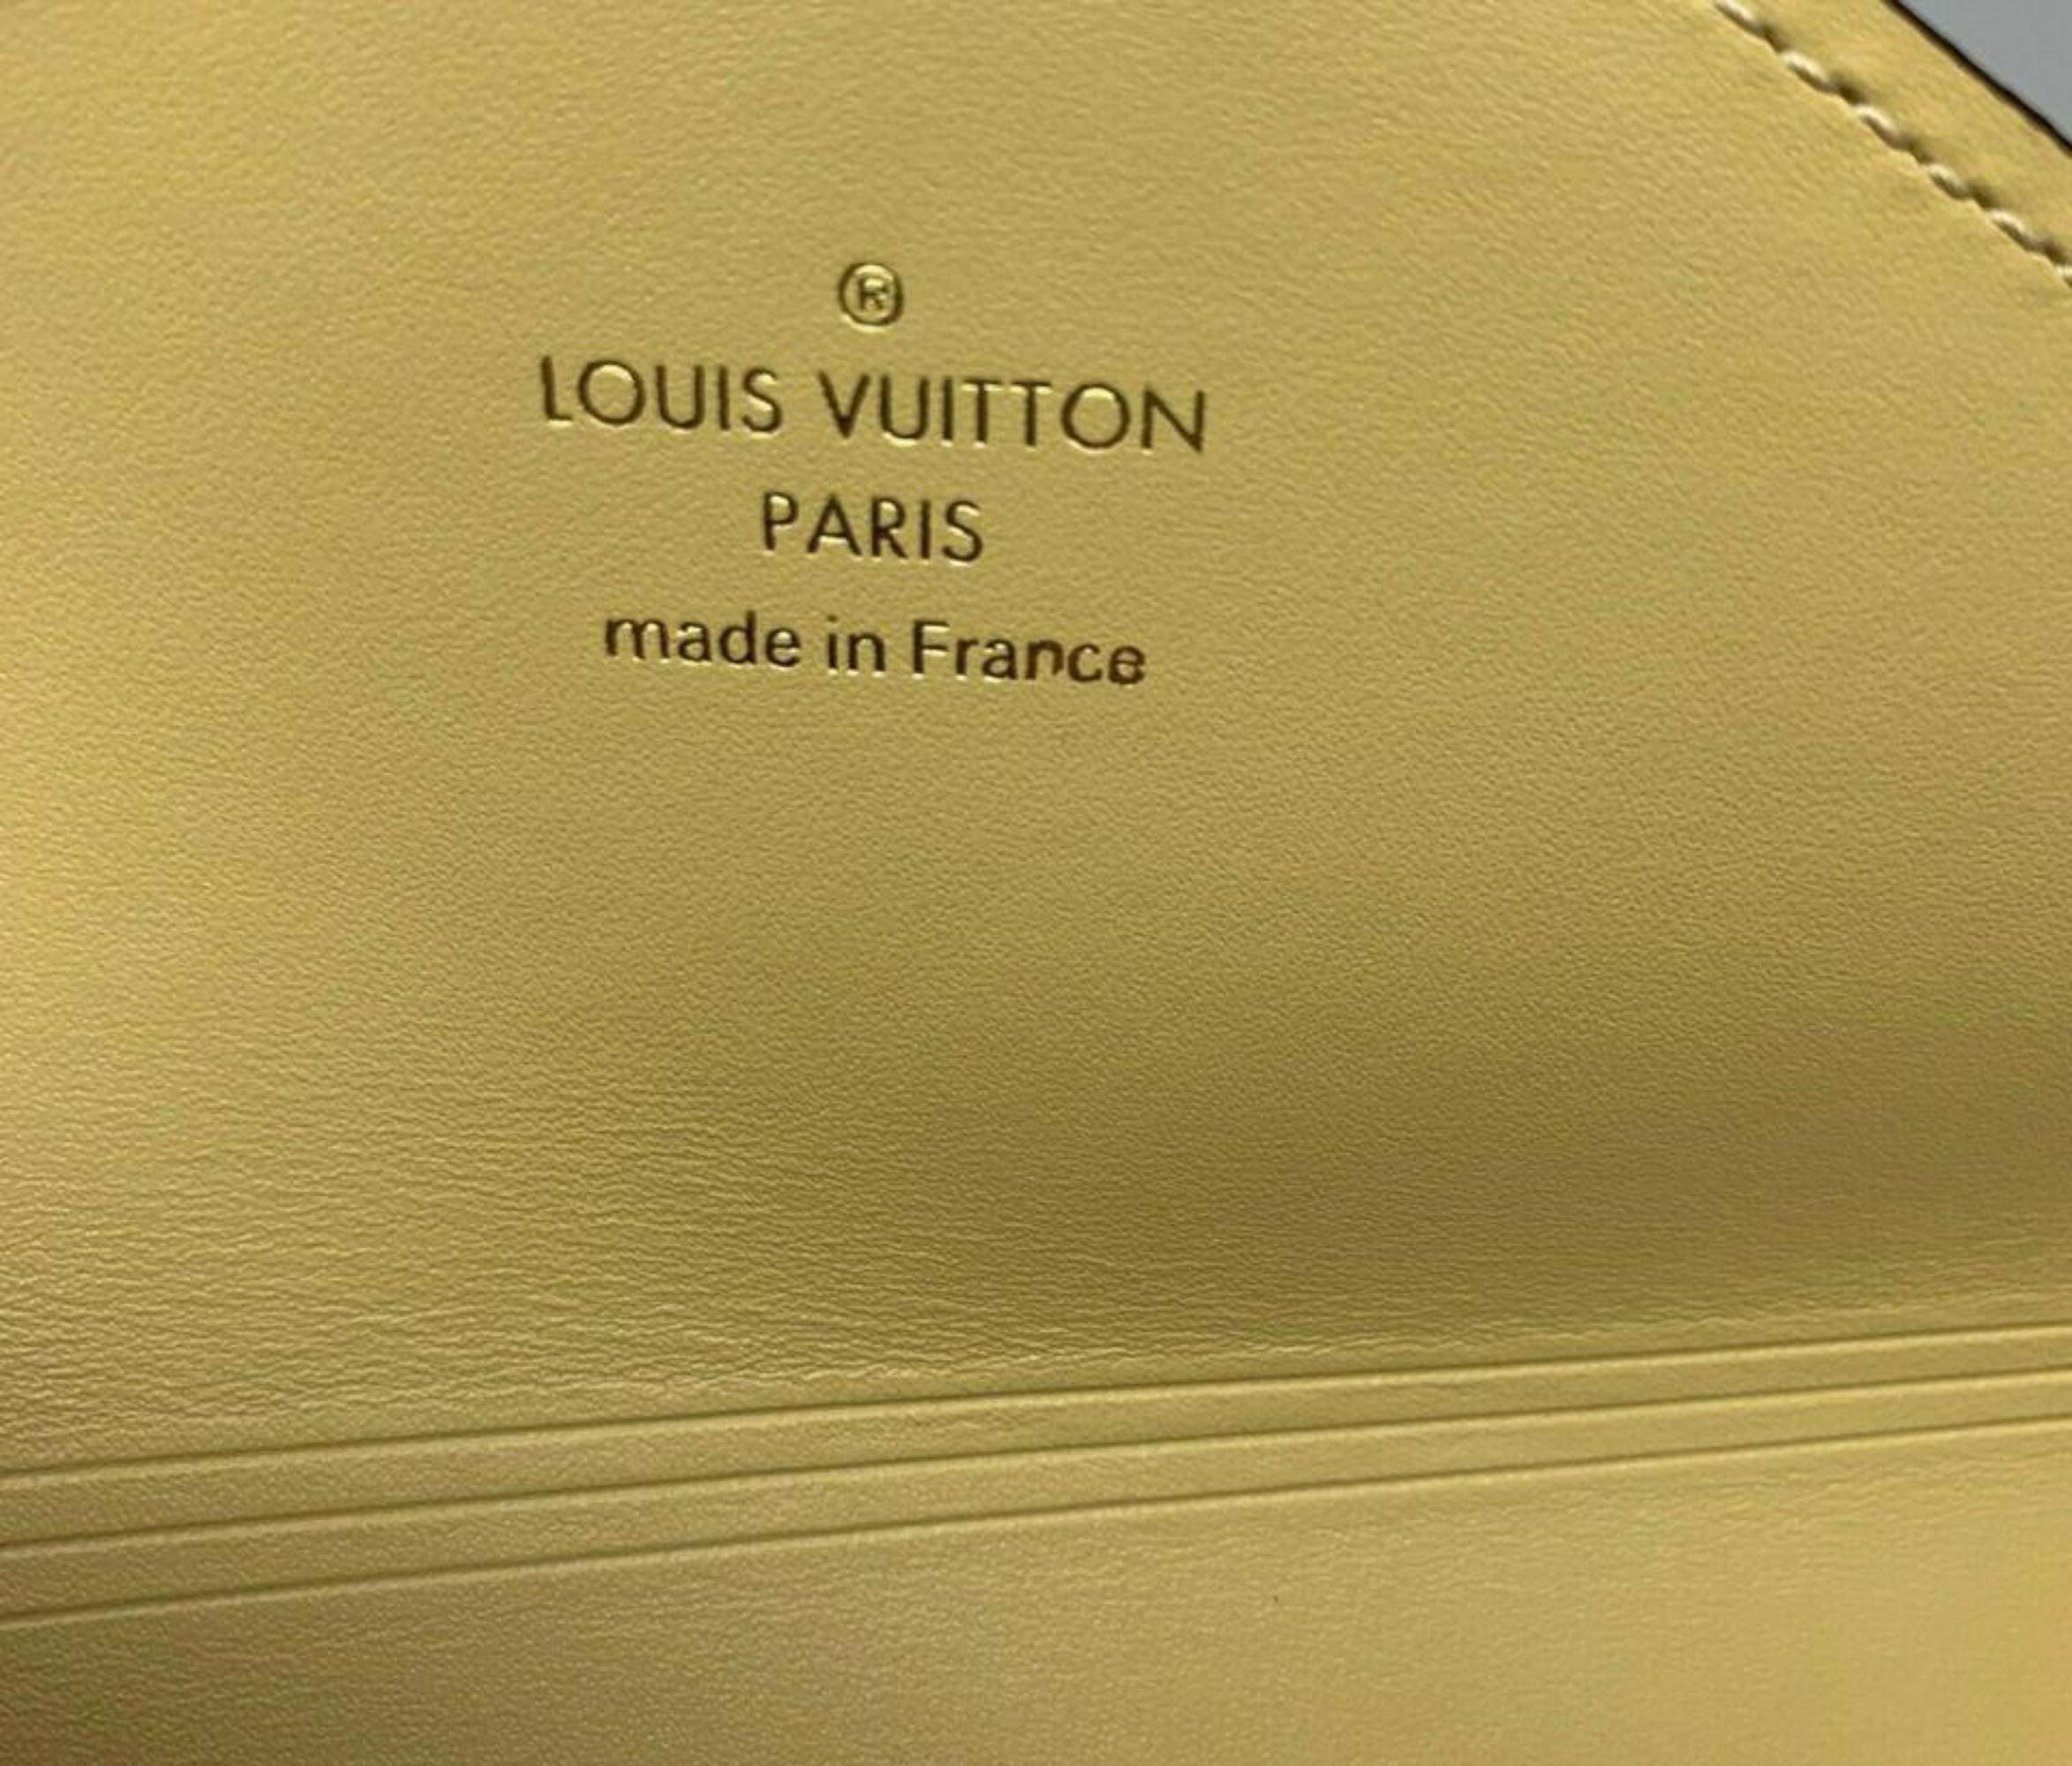 Louis Vuitton Beige Medium Ss19 Limited Edition Giant Kirigami Pouch 870619  For Sale 6